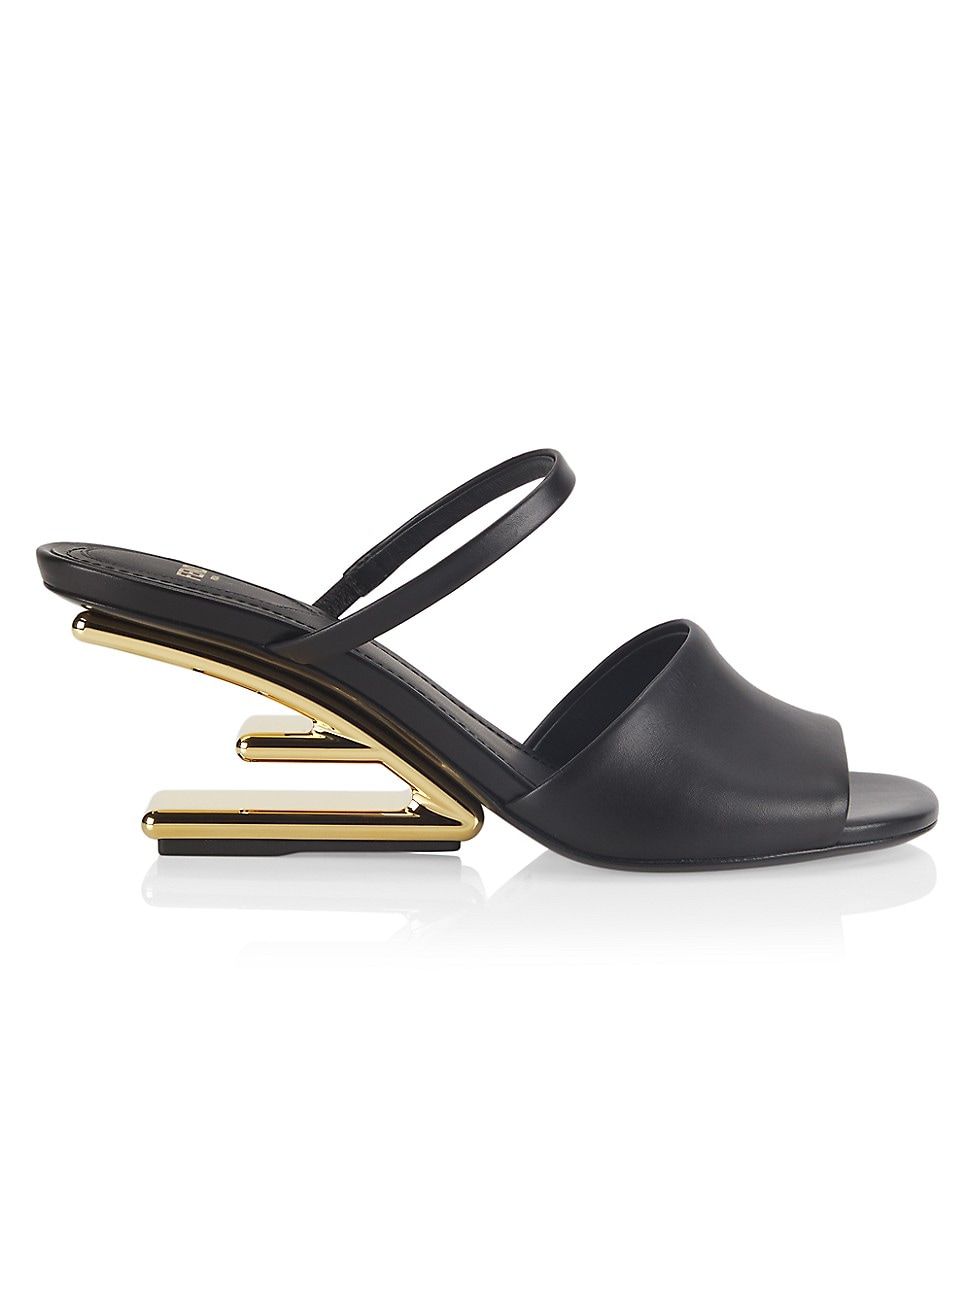 Fendi First Leather Mules | Saks Fifth Avenue